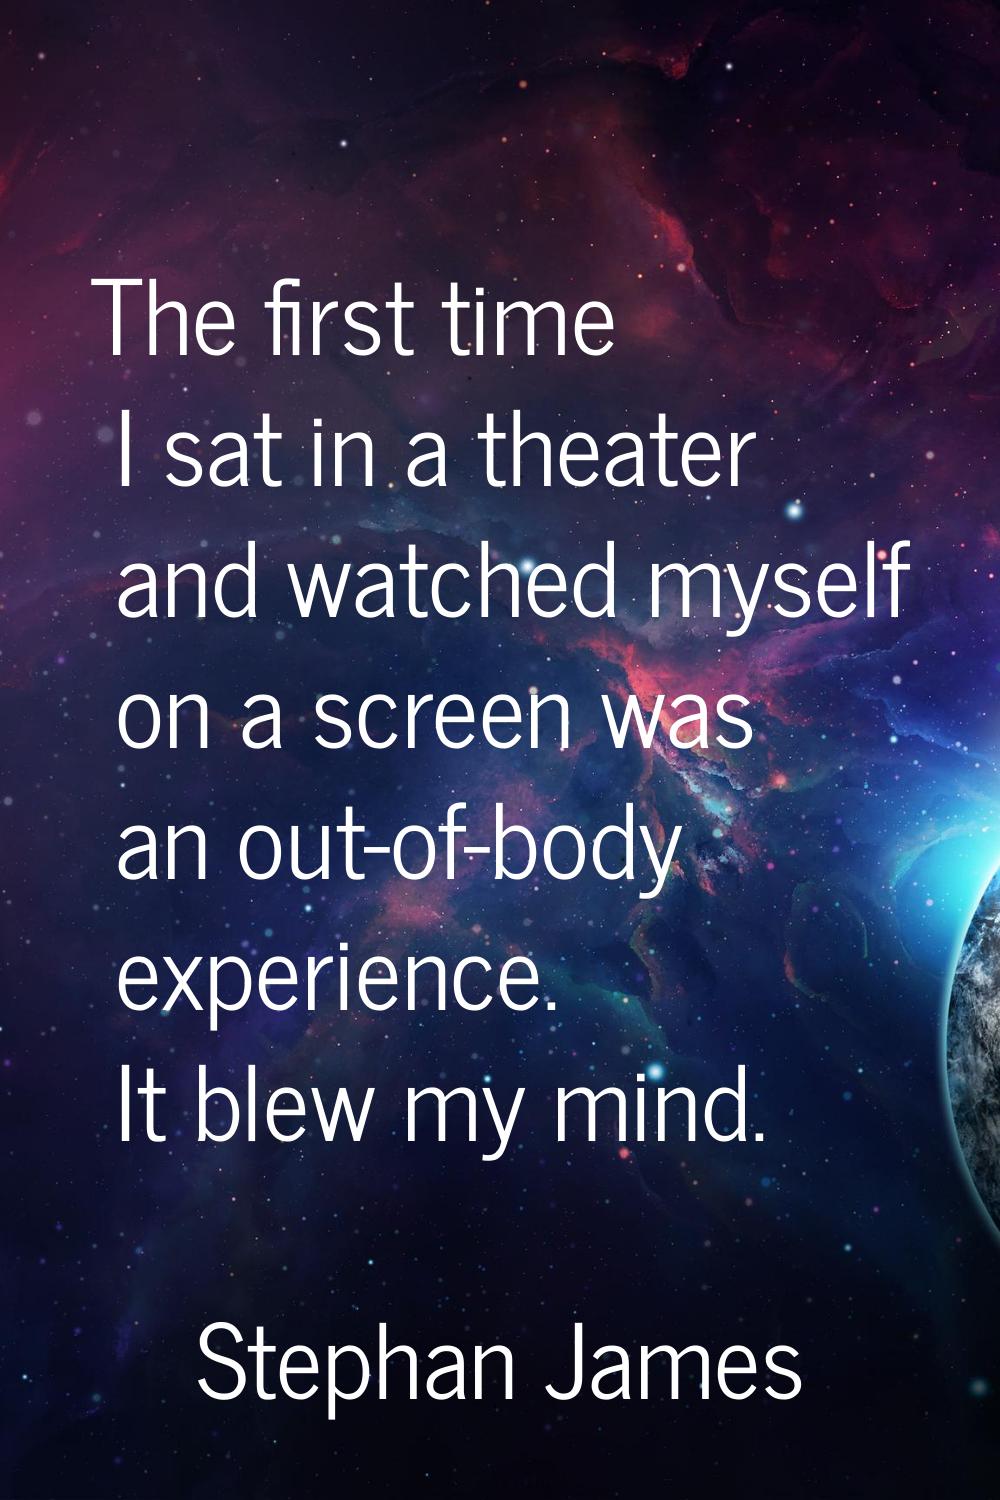 The first time I sat in a theater and watched myself on a screen was an out-of-body experience. It 